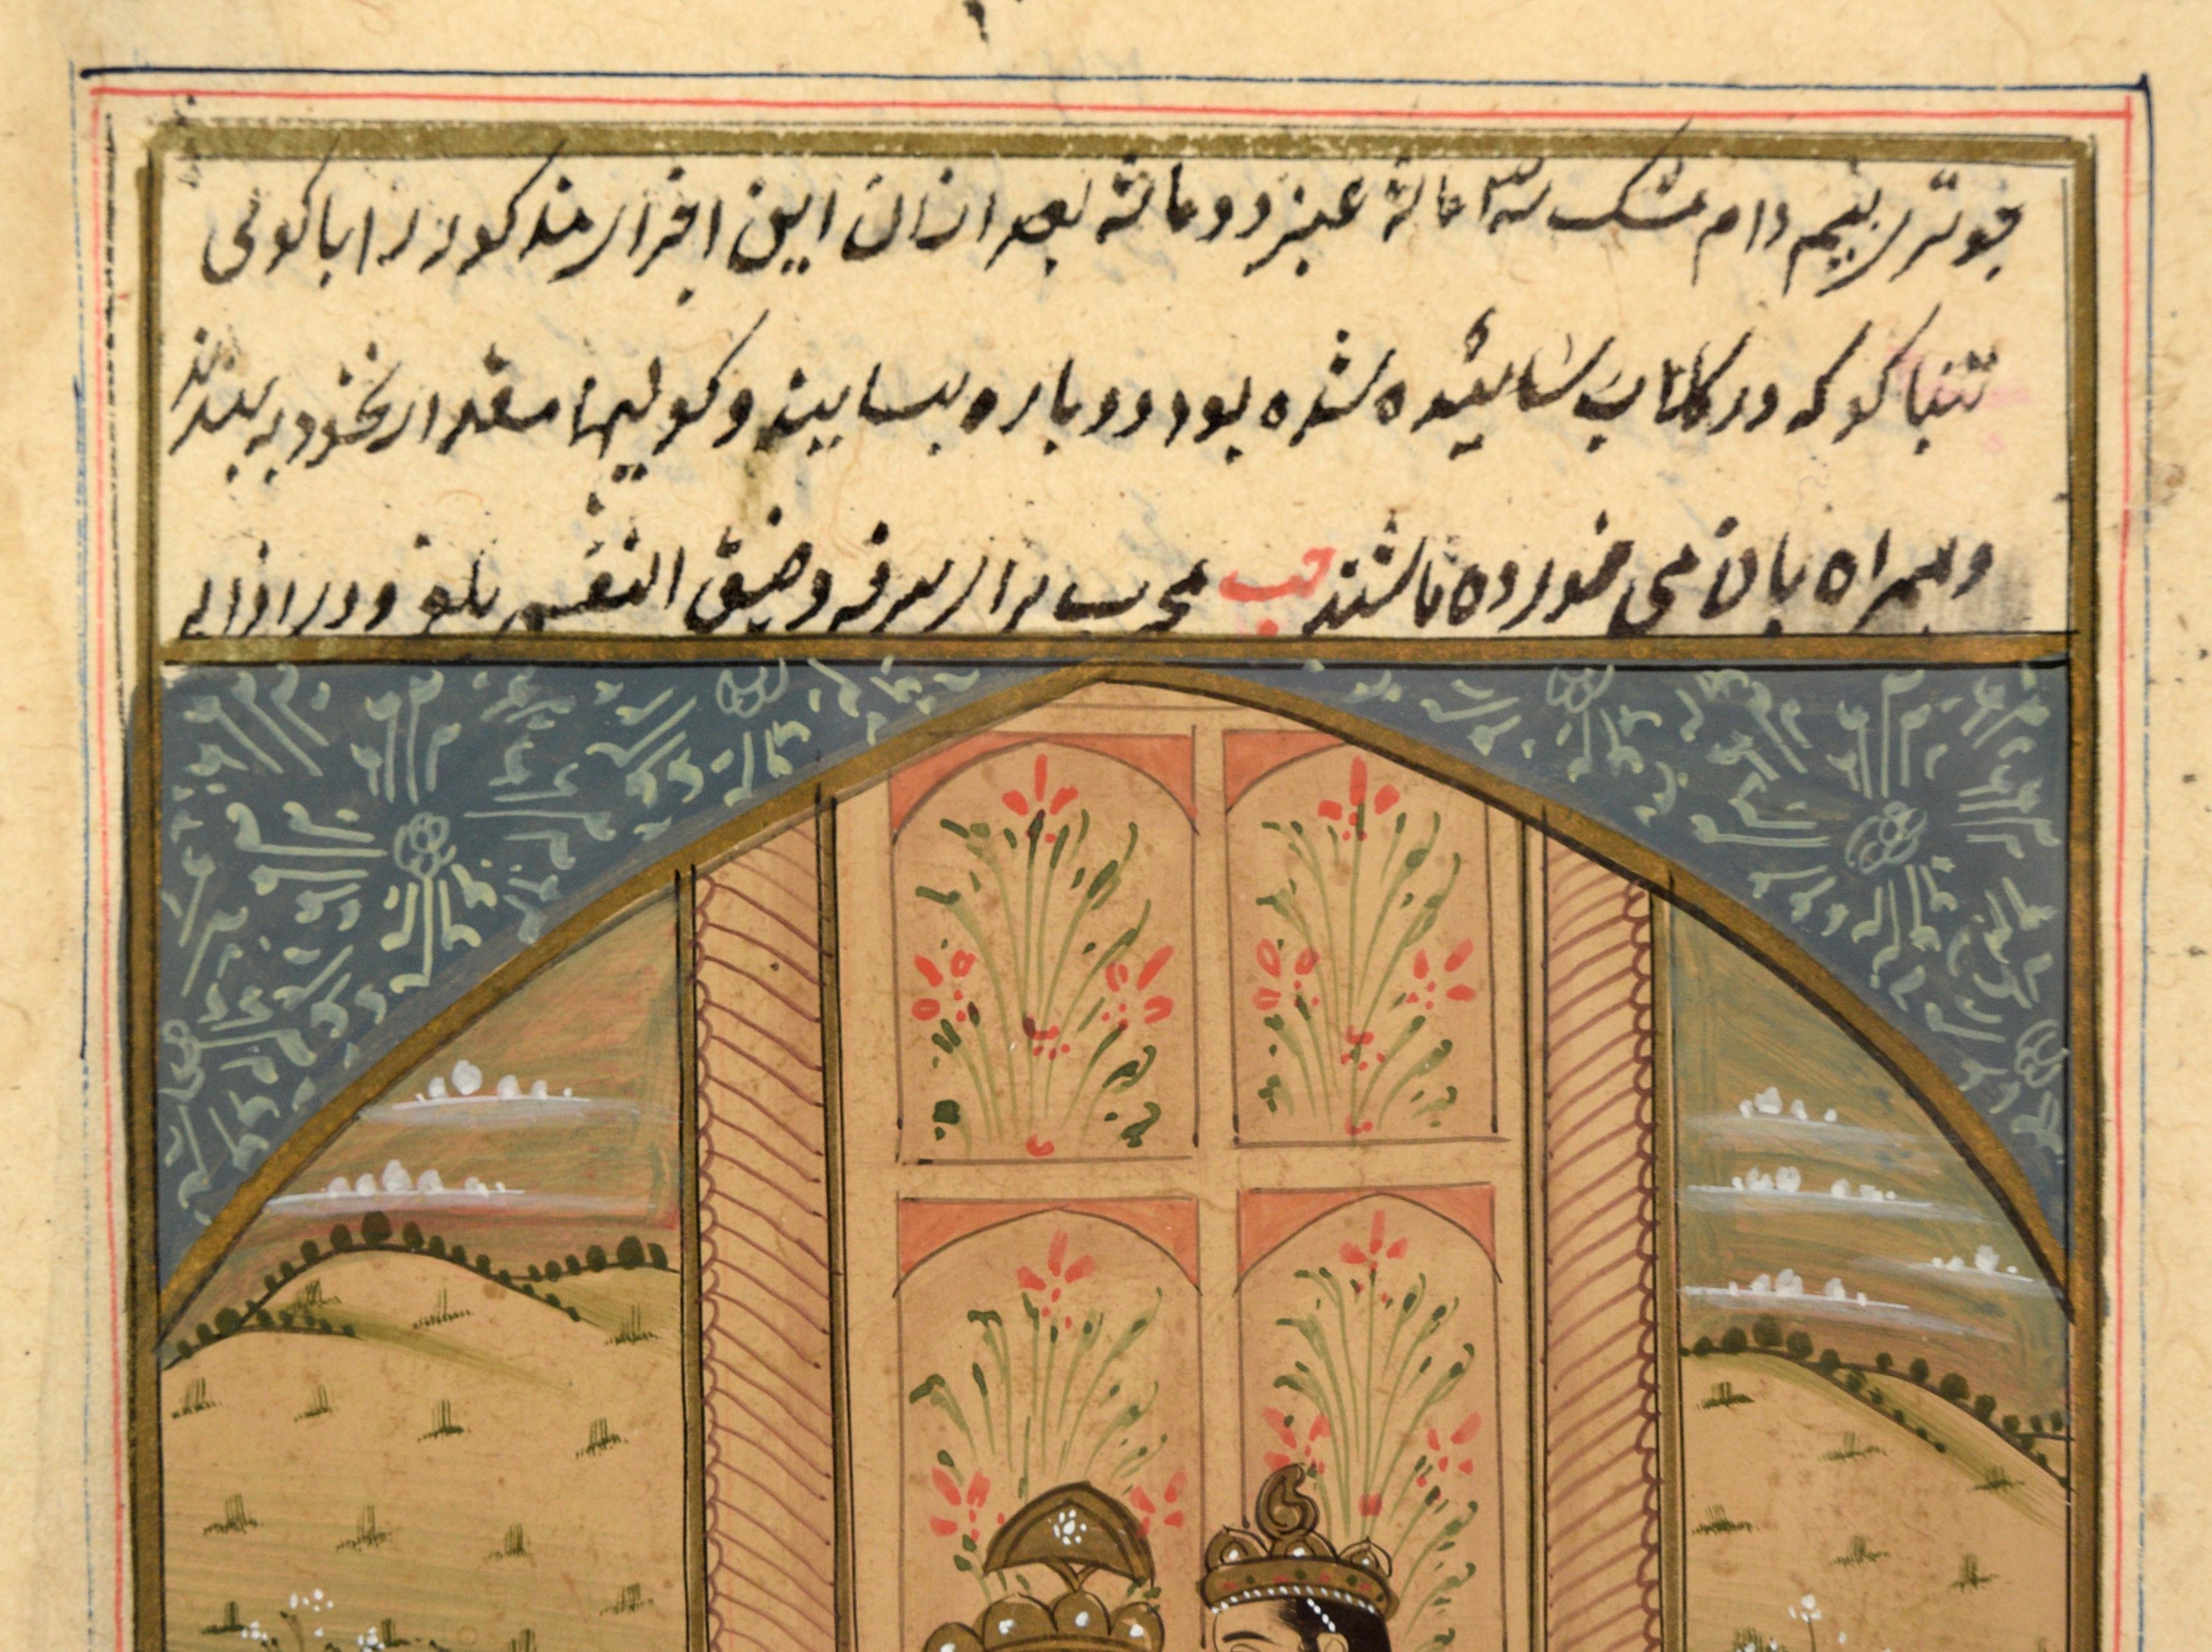 Islamic Persian Manuscript Page, Illustrated in the Safavid Style